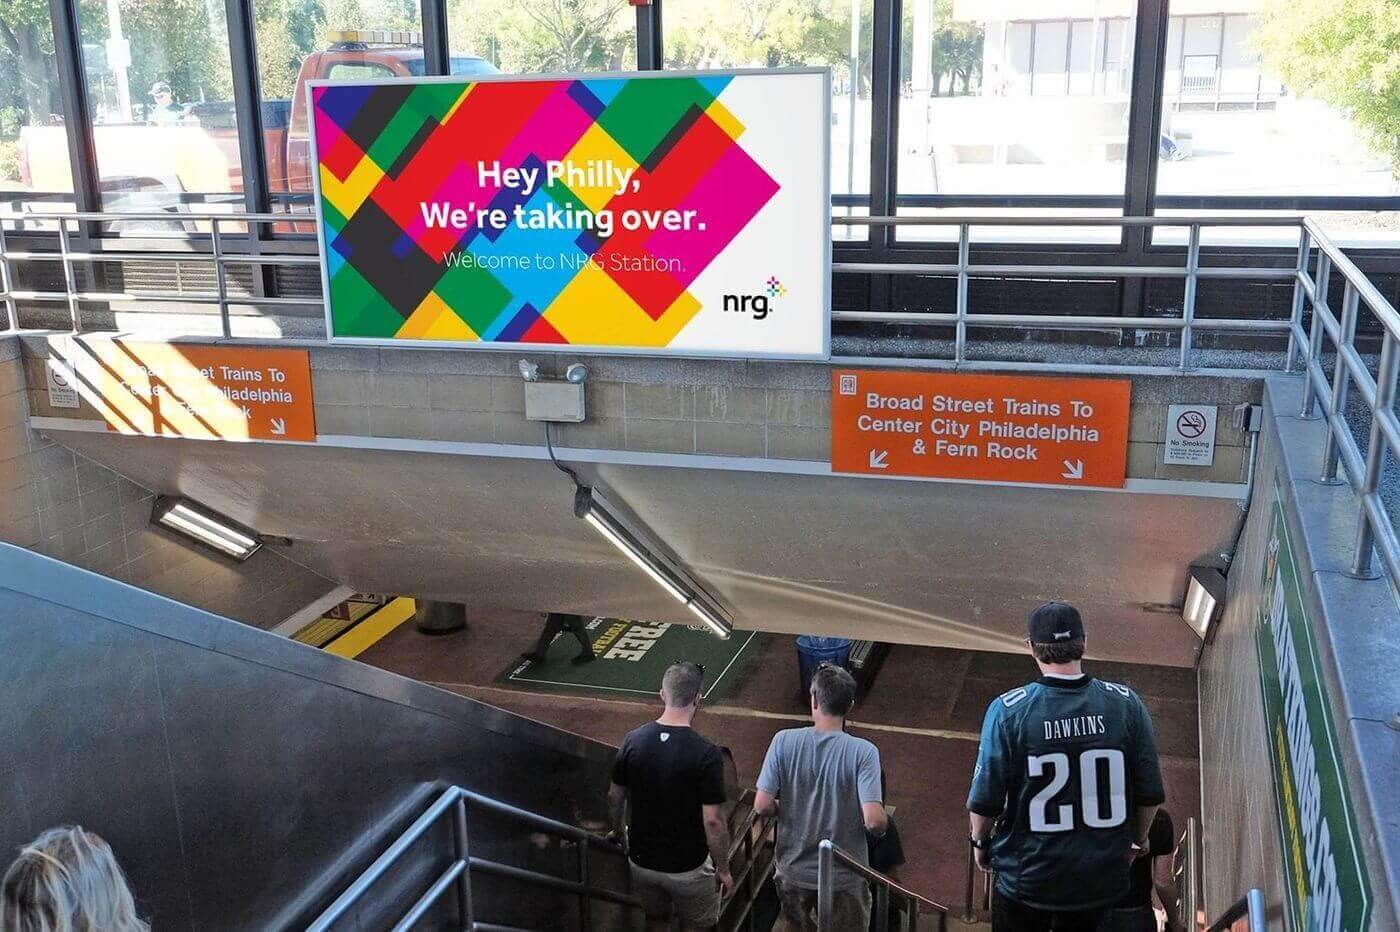 The SEPTA advertises to commuters making their way downtown